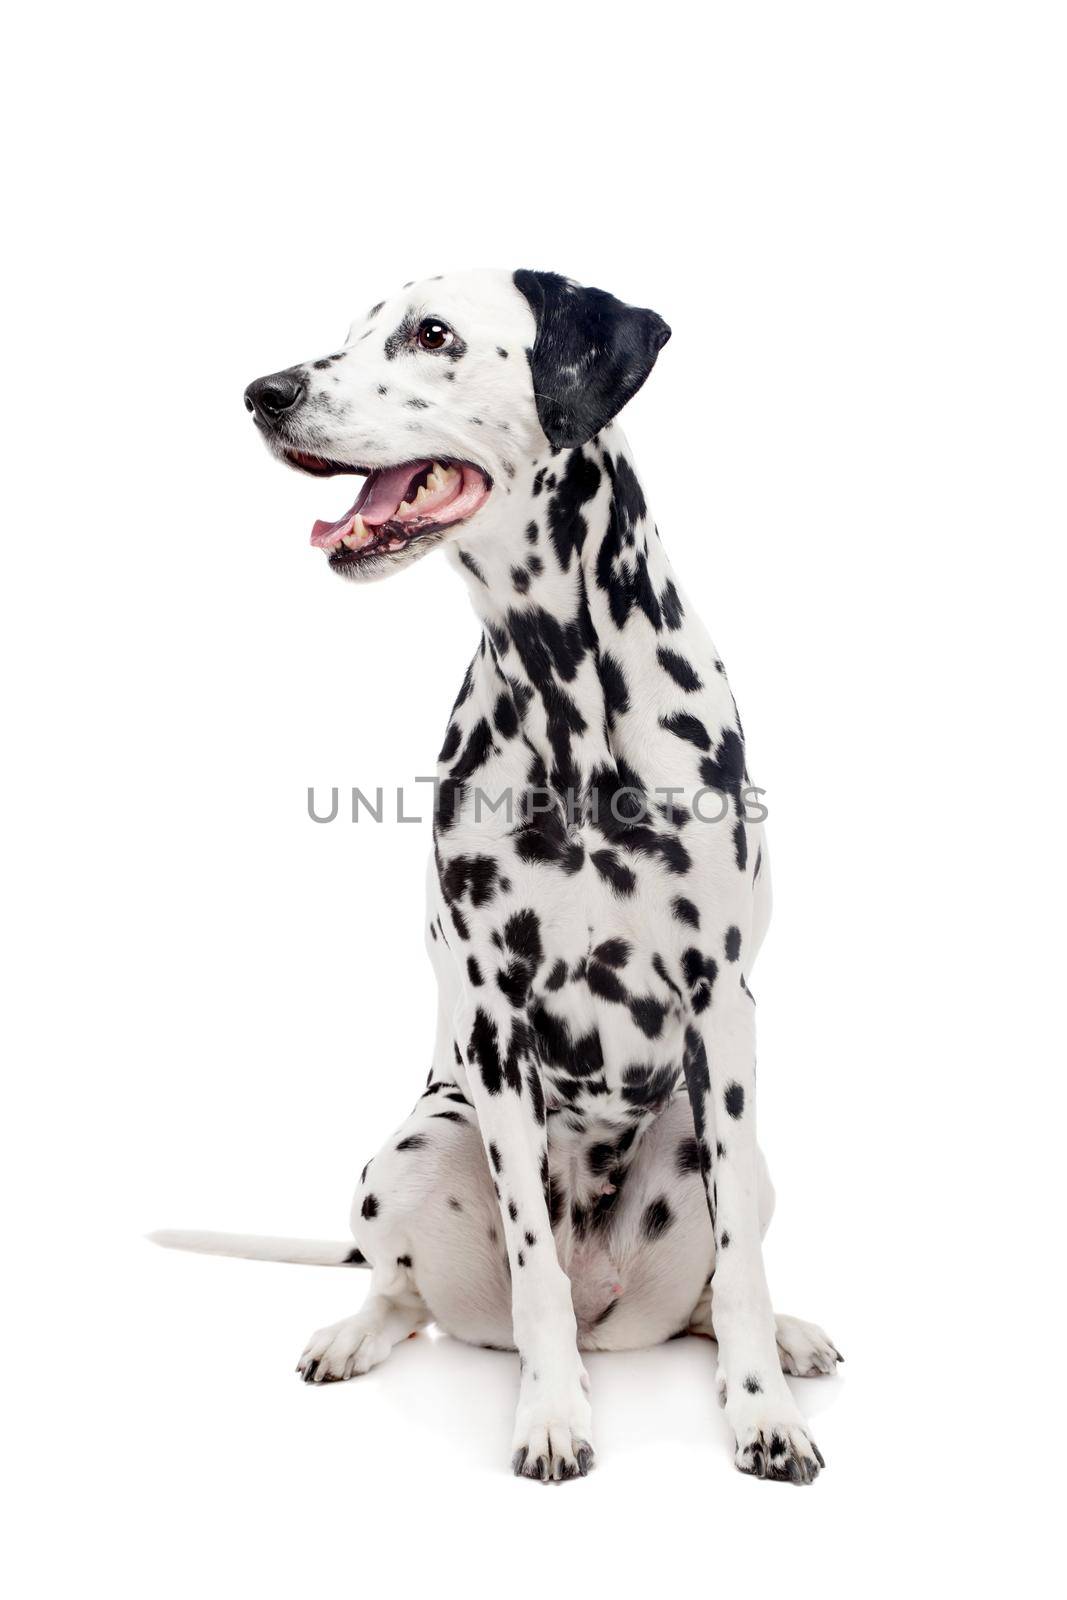 Dalmatian dog, isolated on white by RosaJay